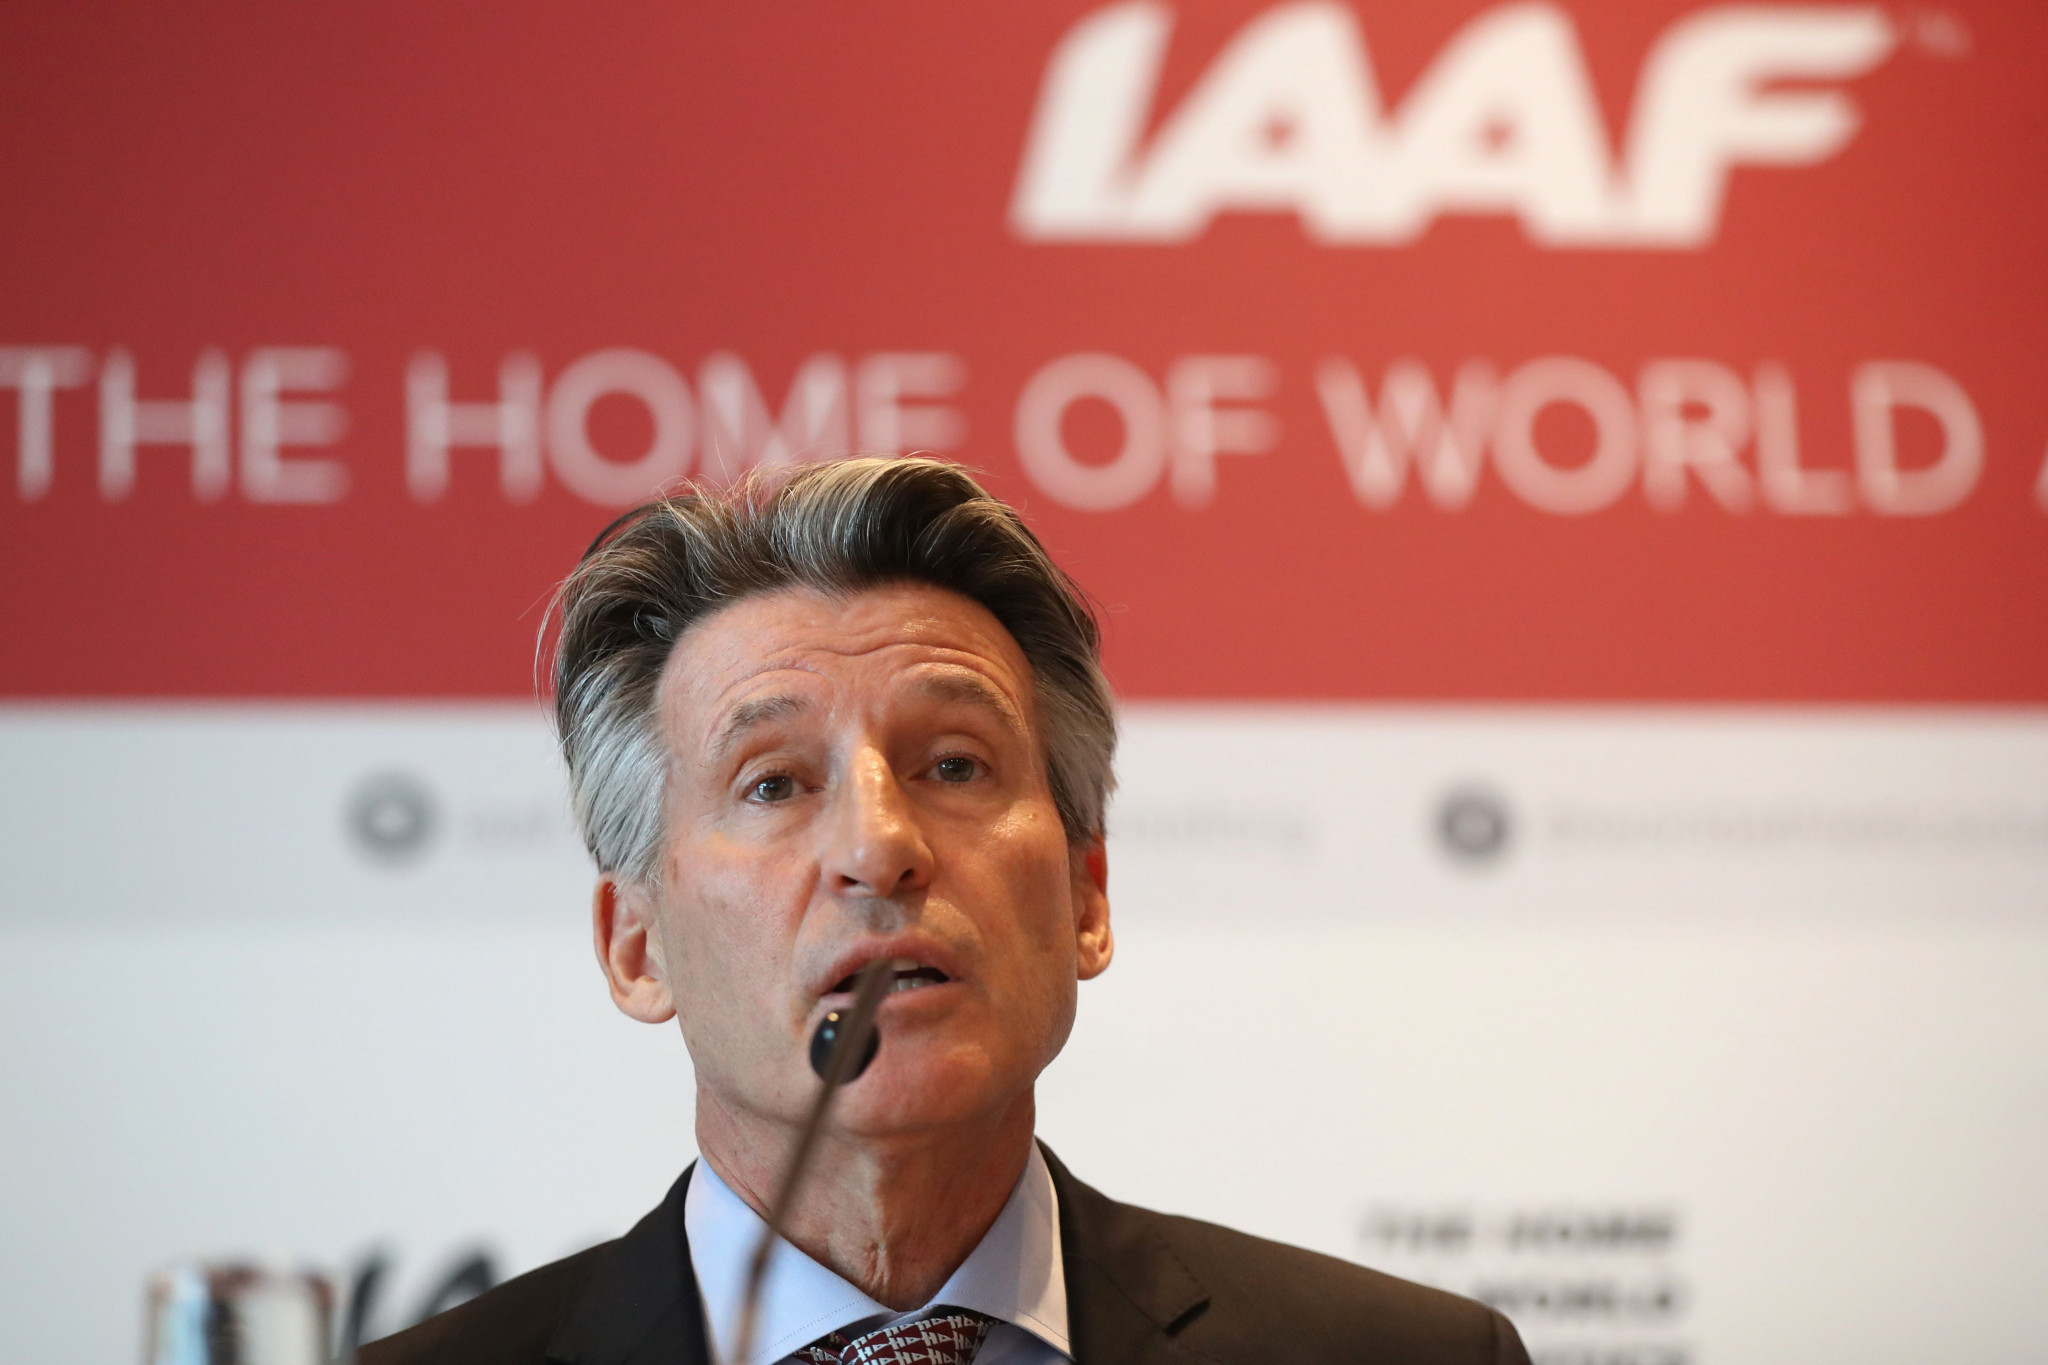 The IAAF, whose President is Sebastian Coe, issued updated guidelines for Russians looking to compete under authorised neutral athlete status last month ©Getty Images